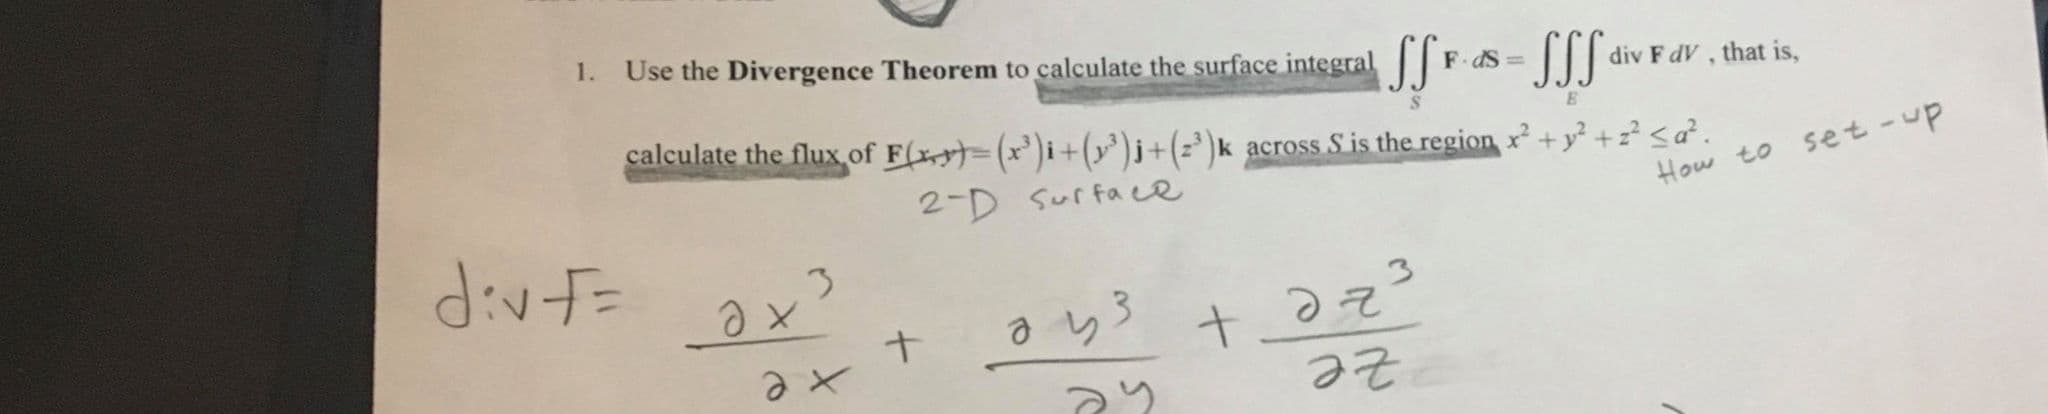 Use the Divergence Theorem to calculate the surface integral F dS =|
1.
-SSS
div F dV , that is,
calculate the flux of F(x=(x')i+(y³)j+(z*)k across S is the region x +y² +z? <a².
2-D Surface
set -up
How to
dvf=
ze
